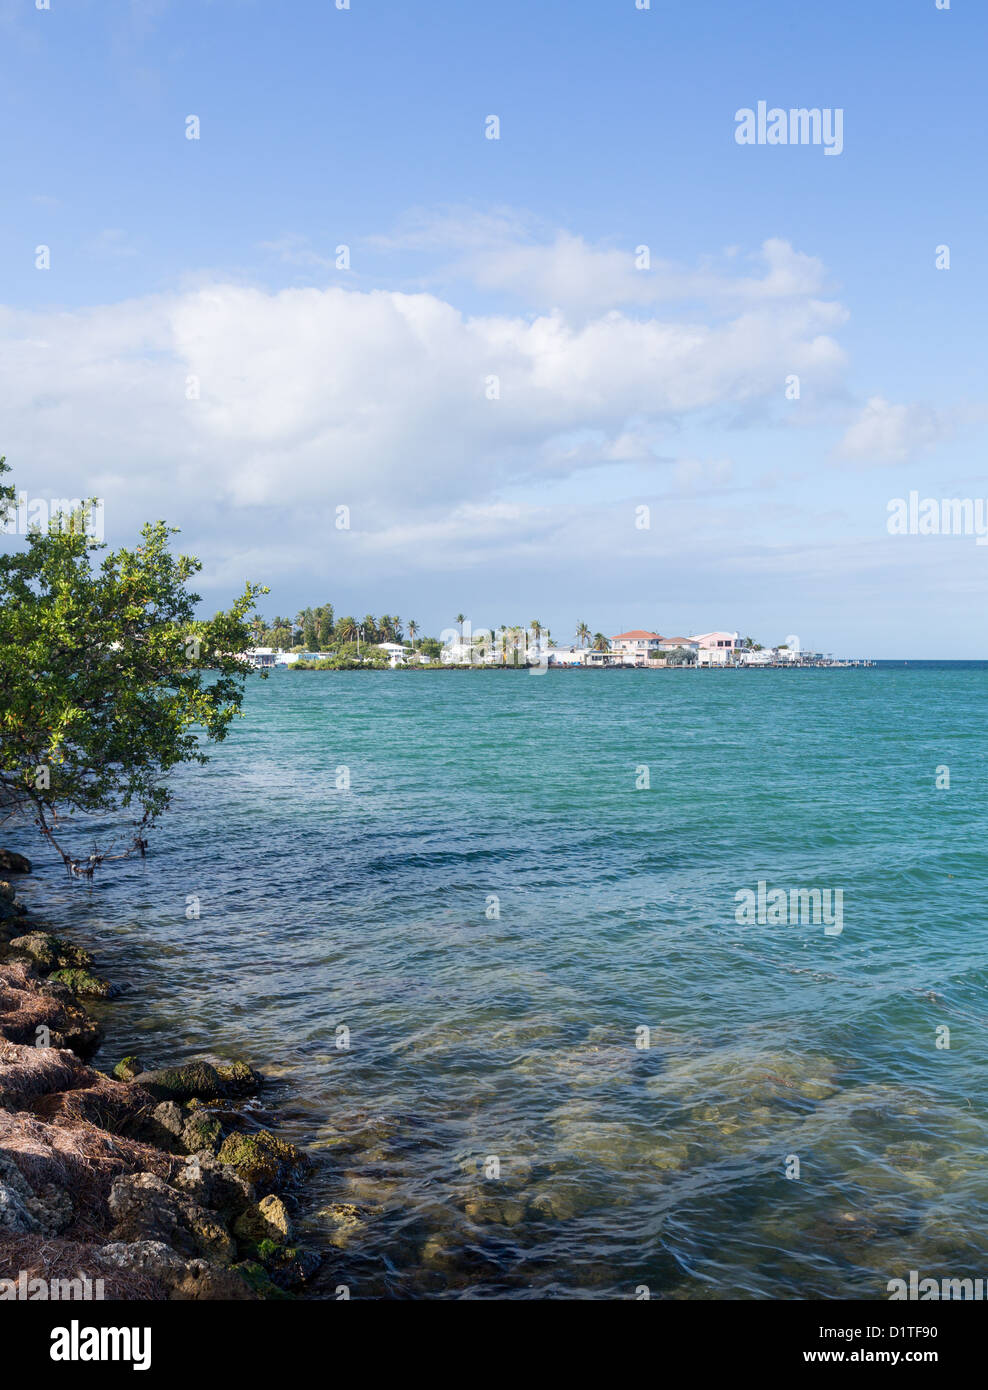 Homes by roadside in Florida Keys by Route 1 Overseas Highway Stock Photo